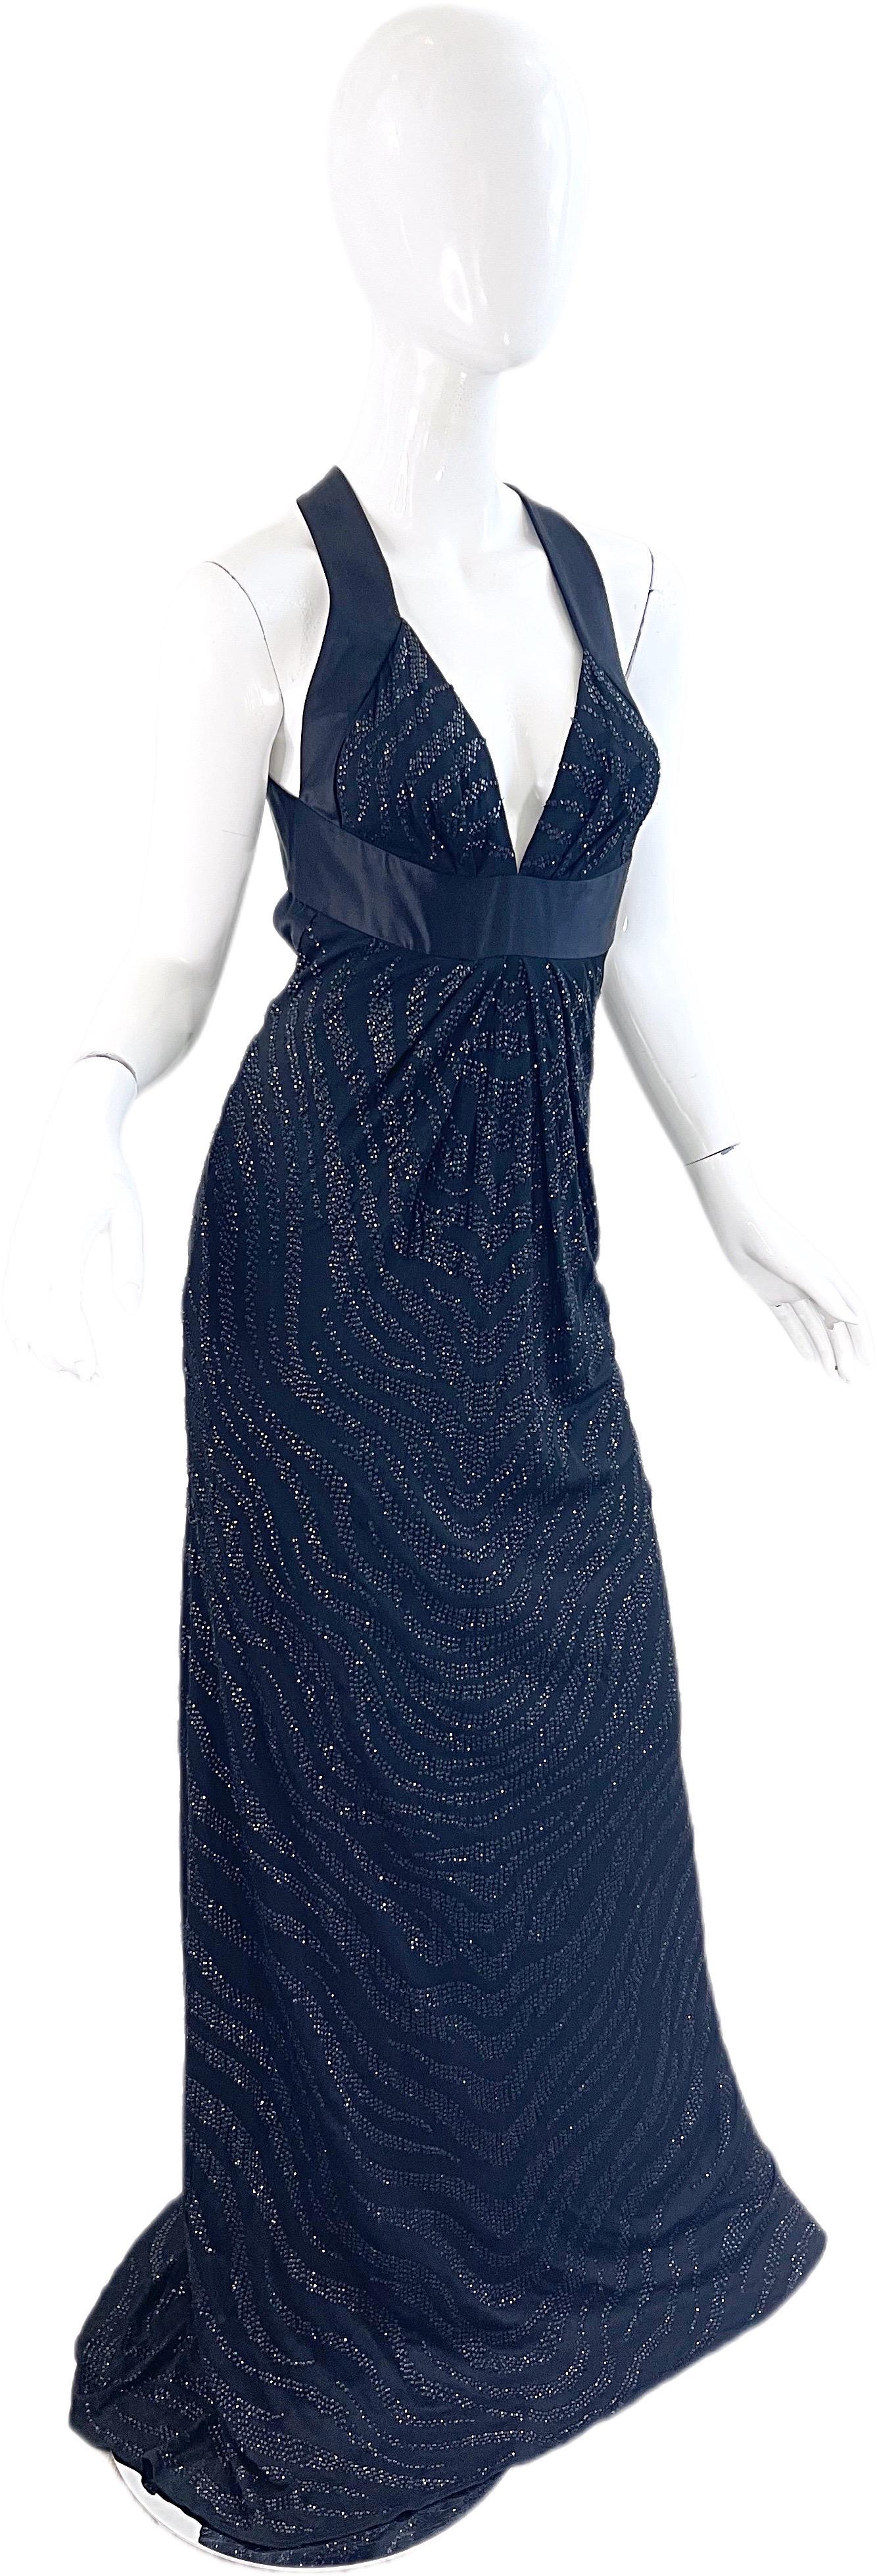 NWT $7.5k Roberto Cavalli Fall 2006 Black Sequin Zebra Print Plunging Back Gown For Sale 6